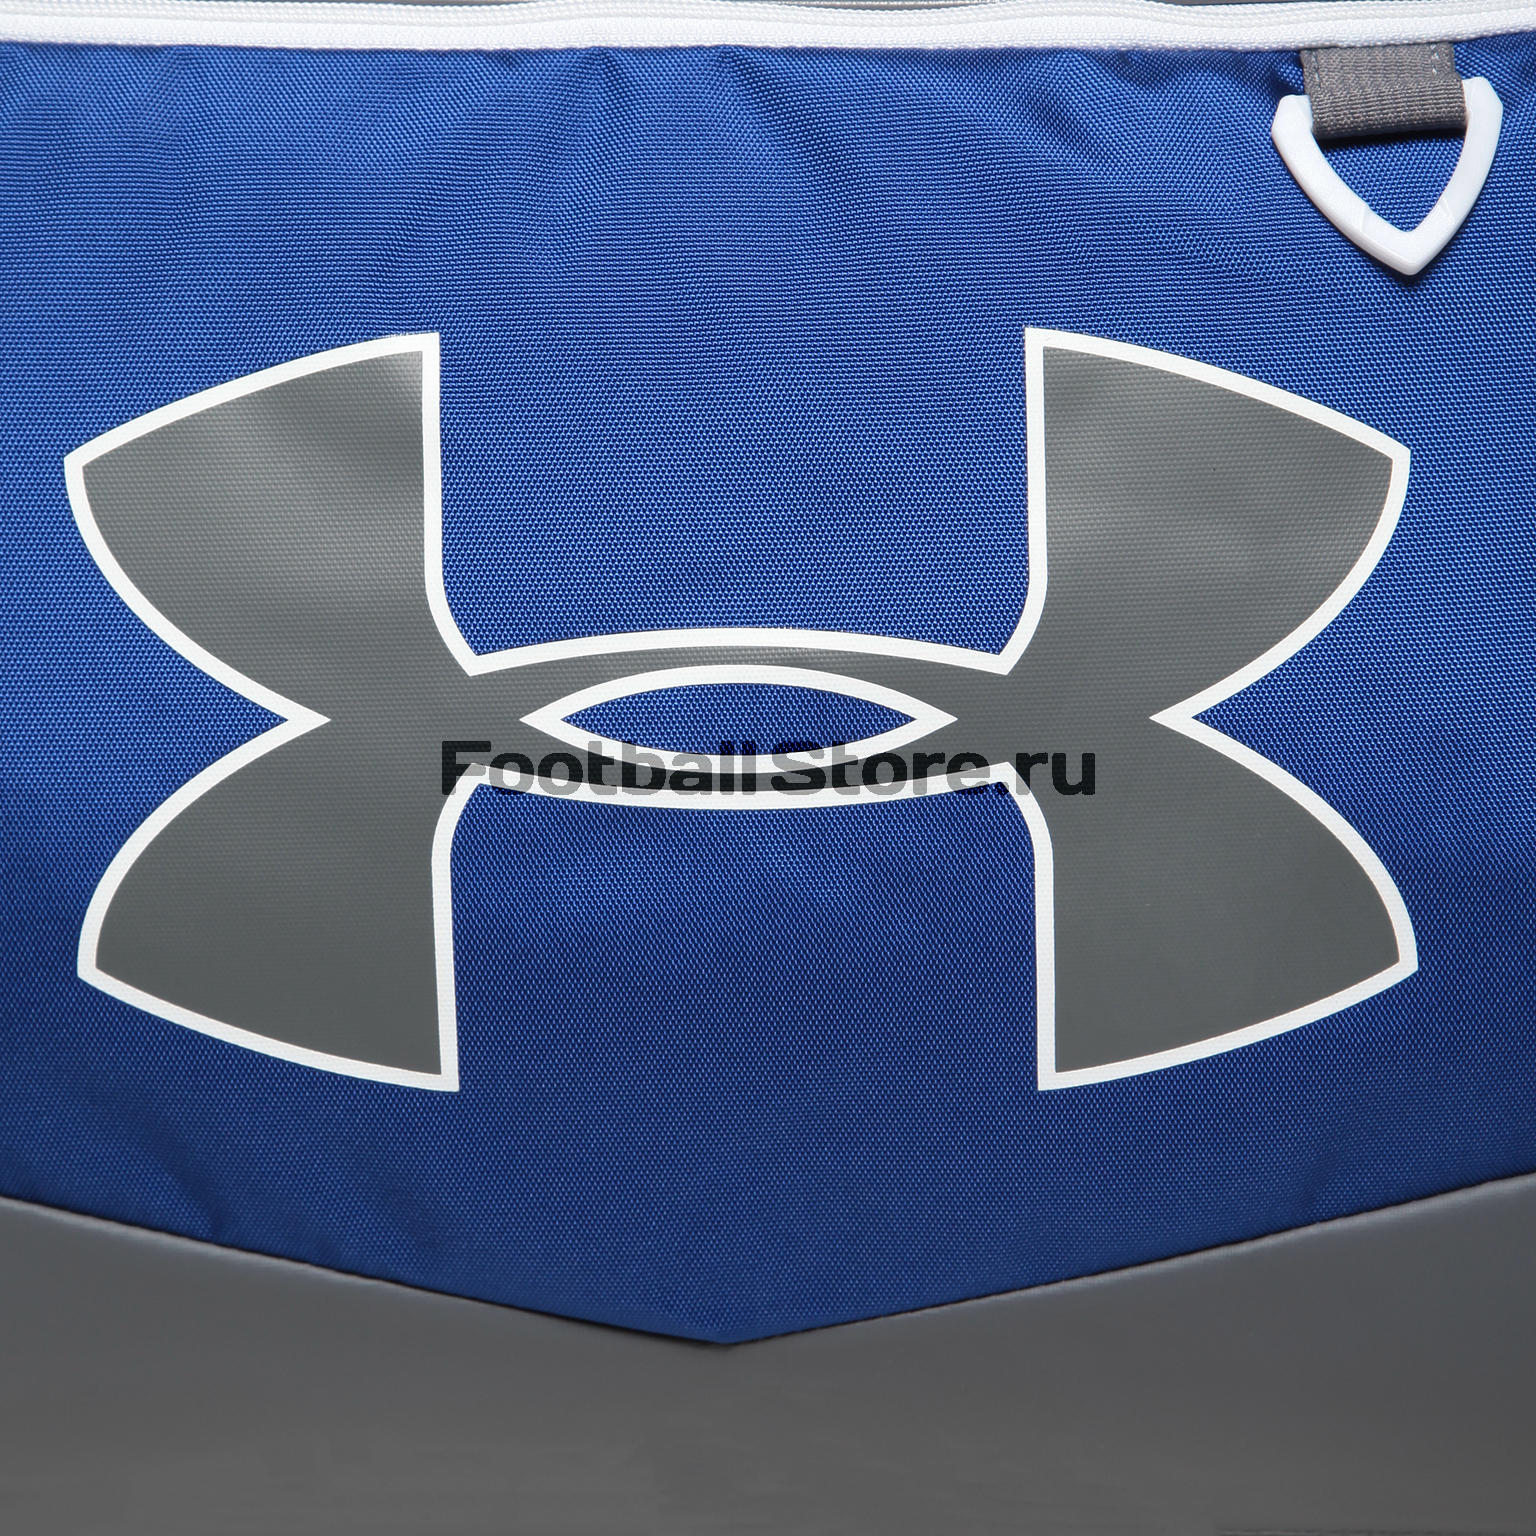 Сумка Under Armour Undeniable MD Duffel 1263967-400 